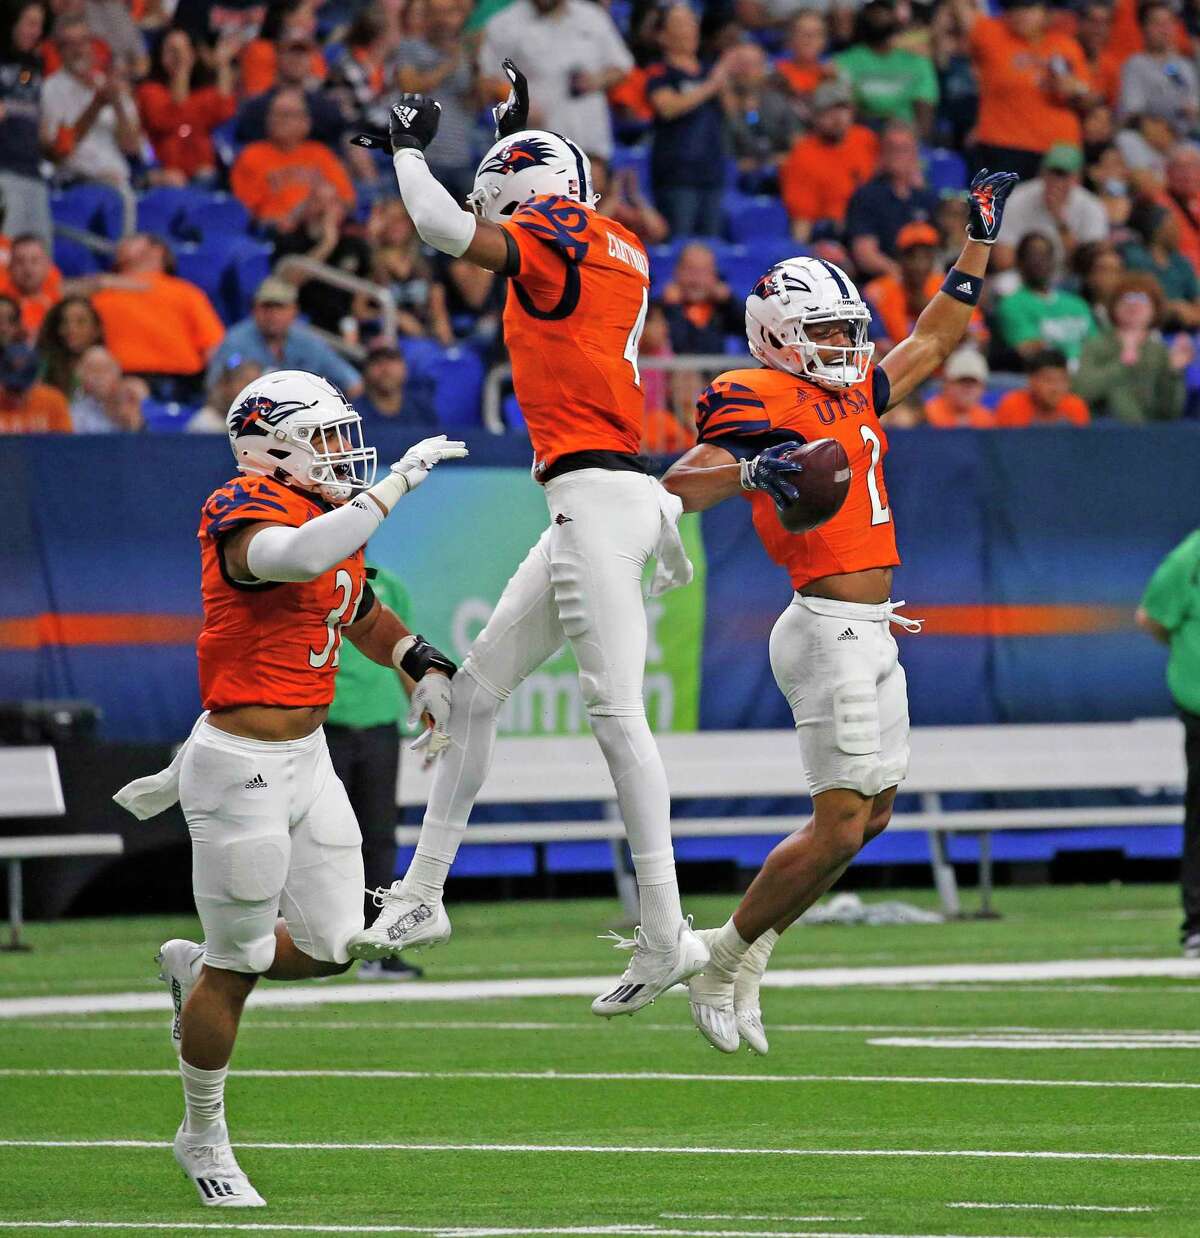 SAN ANTONIO, TX - OCTOBER 22: Corner back Corey Mayfield Jr. #2 of the UTSA Roadrunners celebrates a interception against North Texas Mean Green in the second half at the Alamodome on October 22, 2022 in San Antonio, Texas. (Photo by Ronald Cortes/Getty Images)